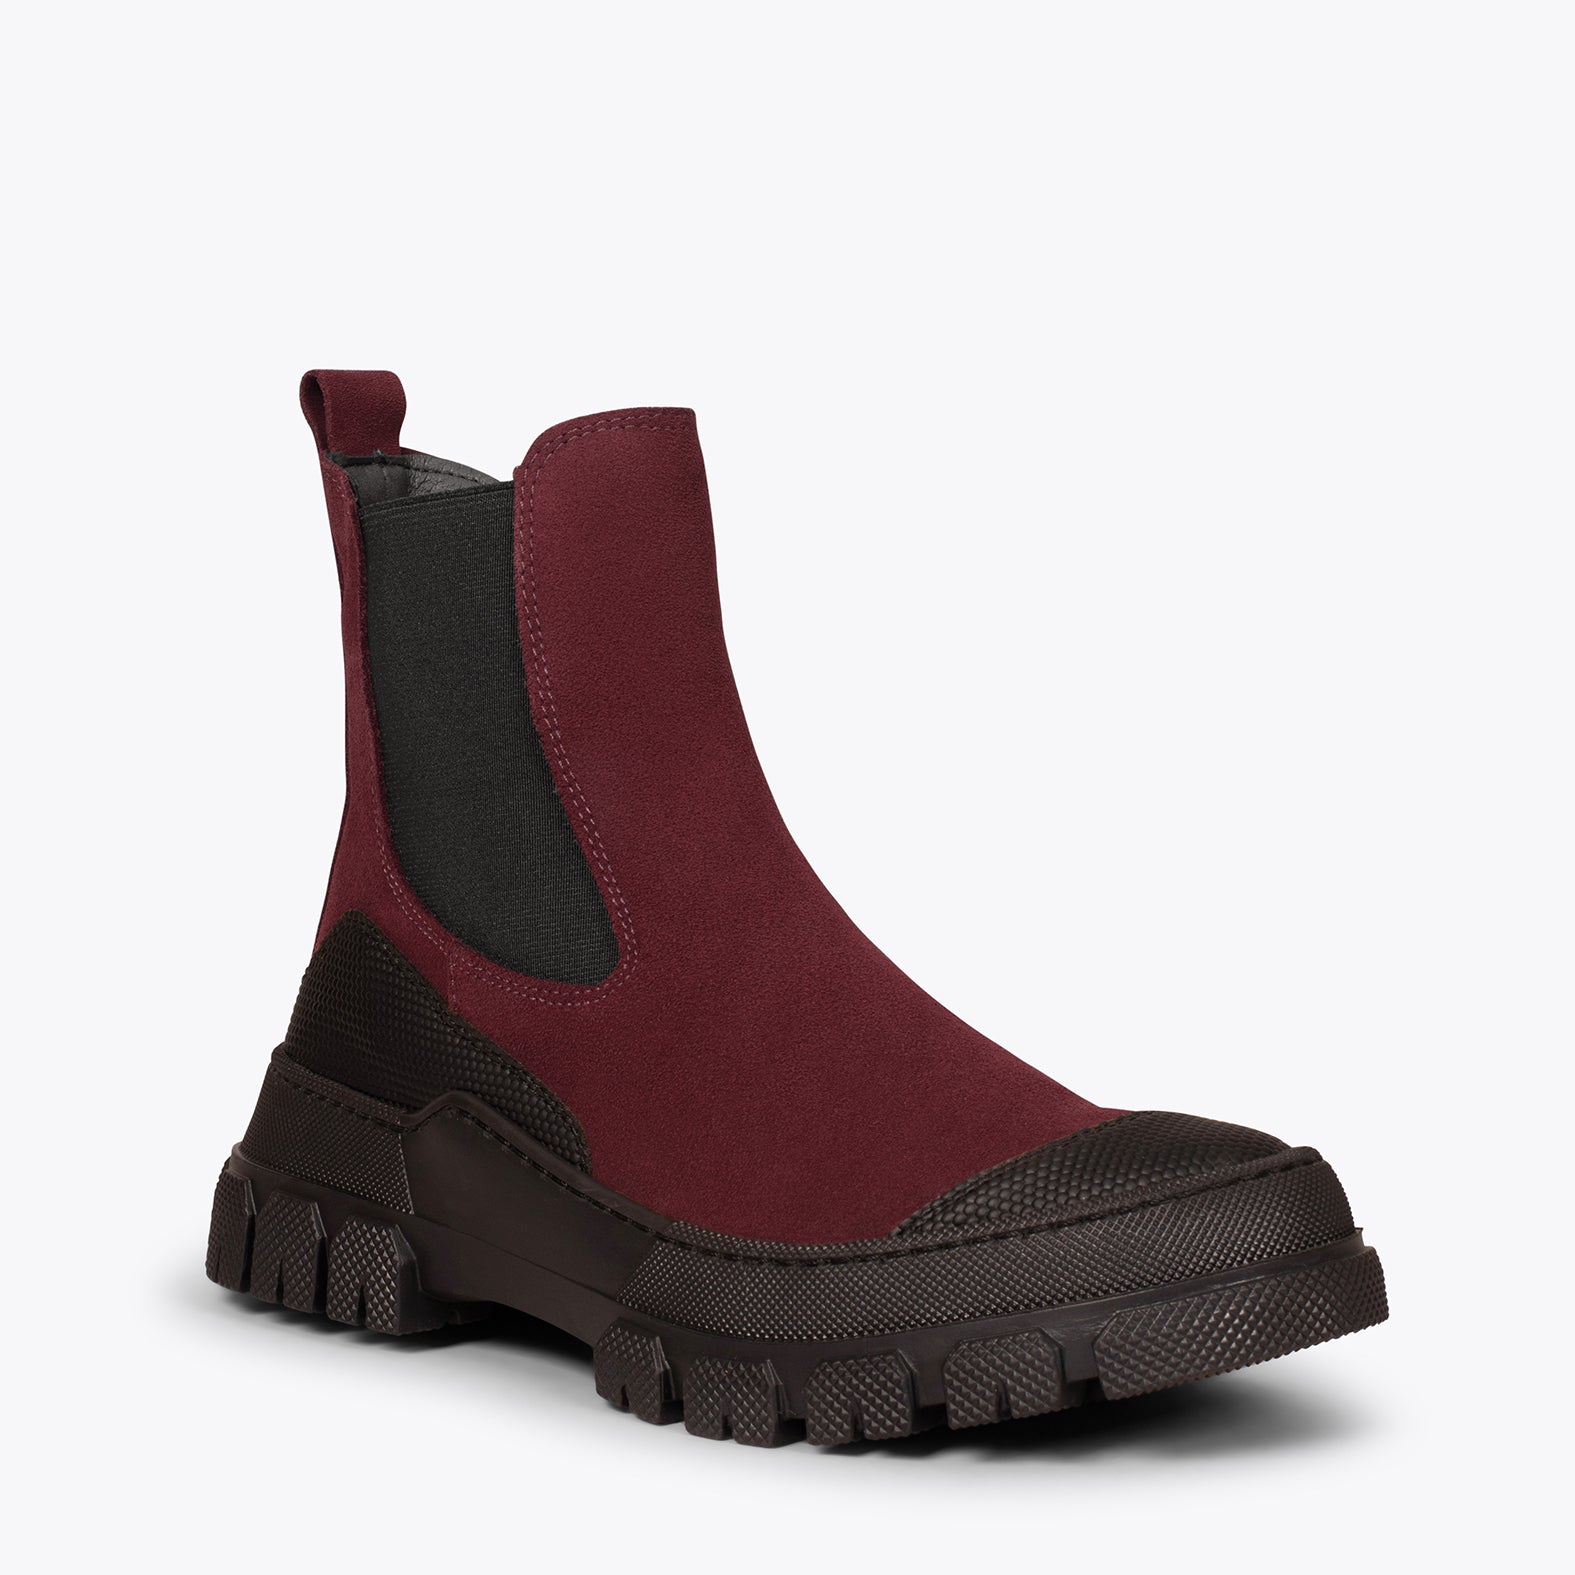 BROOKLYN - BURGUNDY track booties with rubber toe